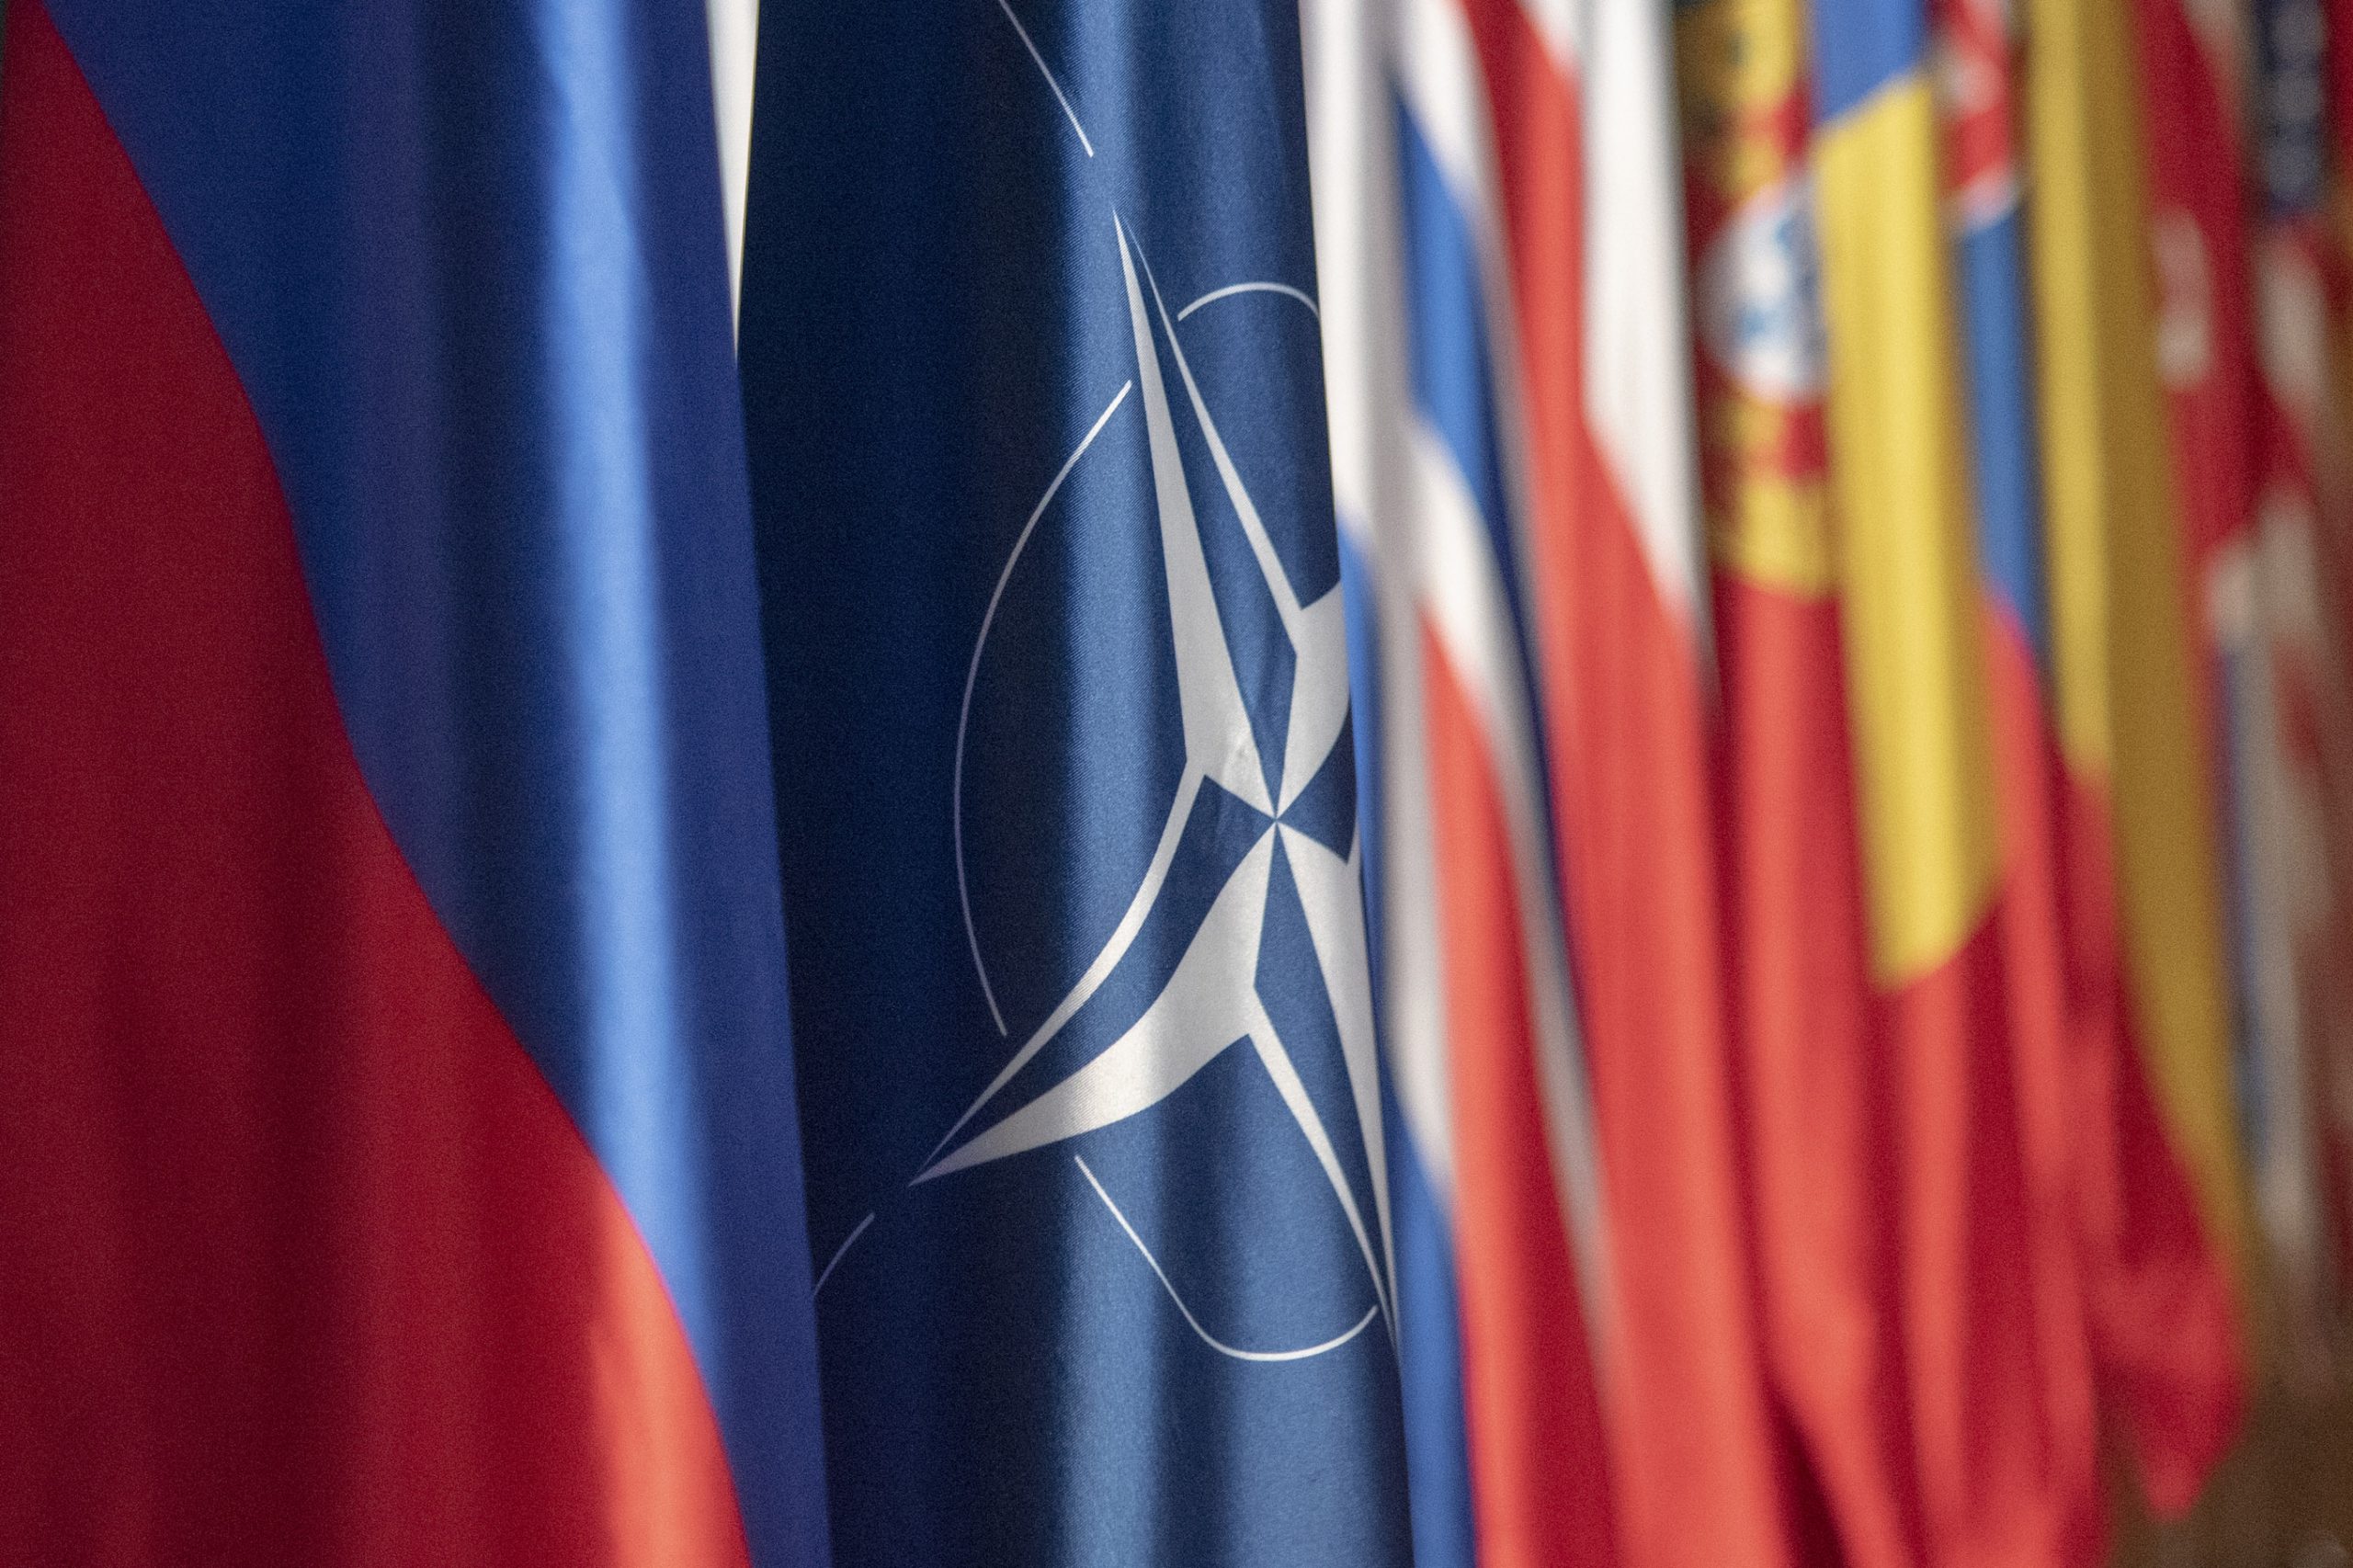 NATO leaders will meet in Madrid today to discuss the Strategic Concept